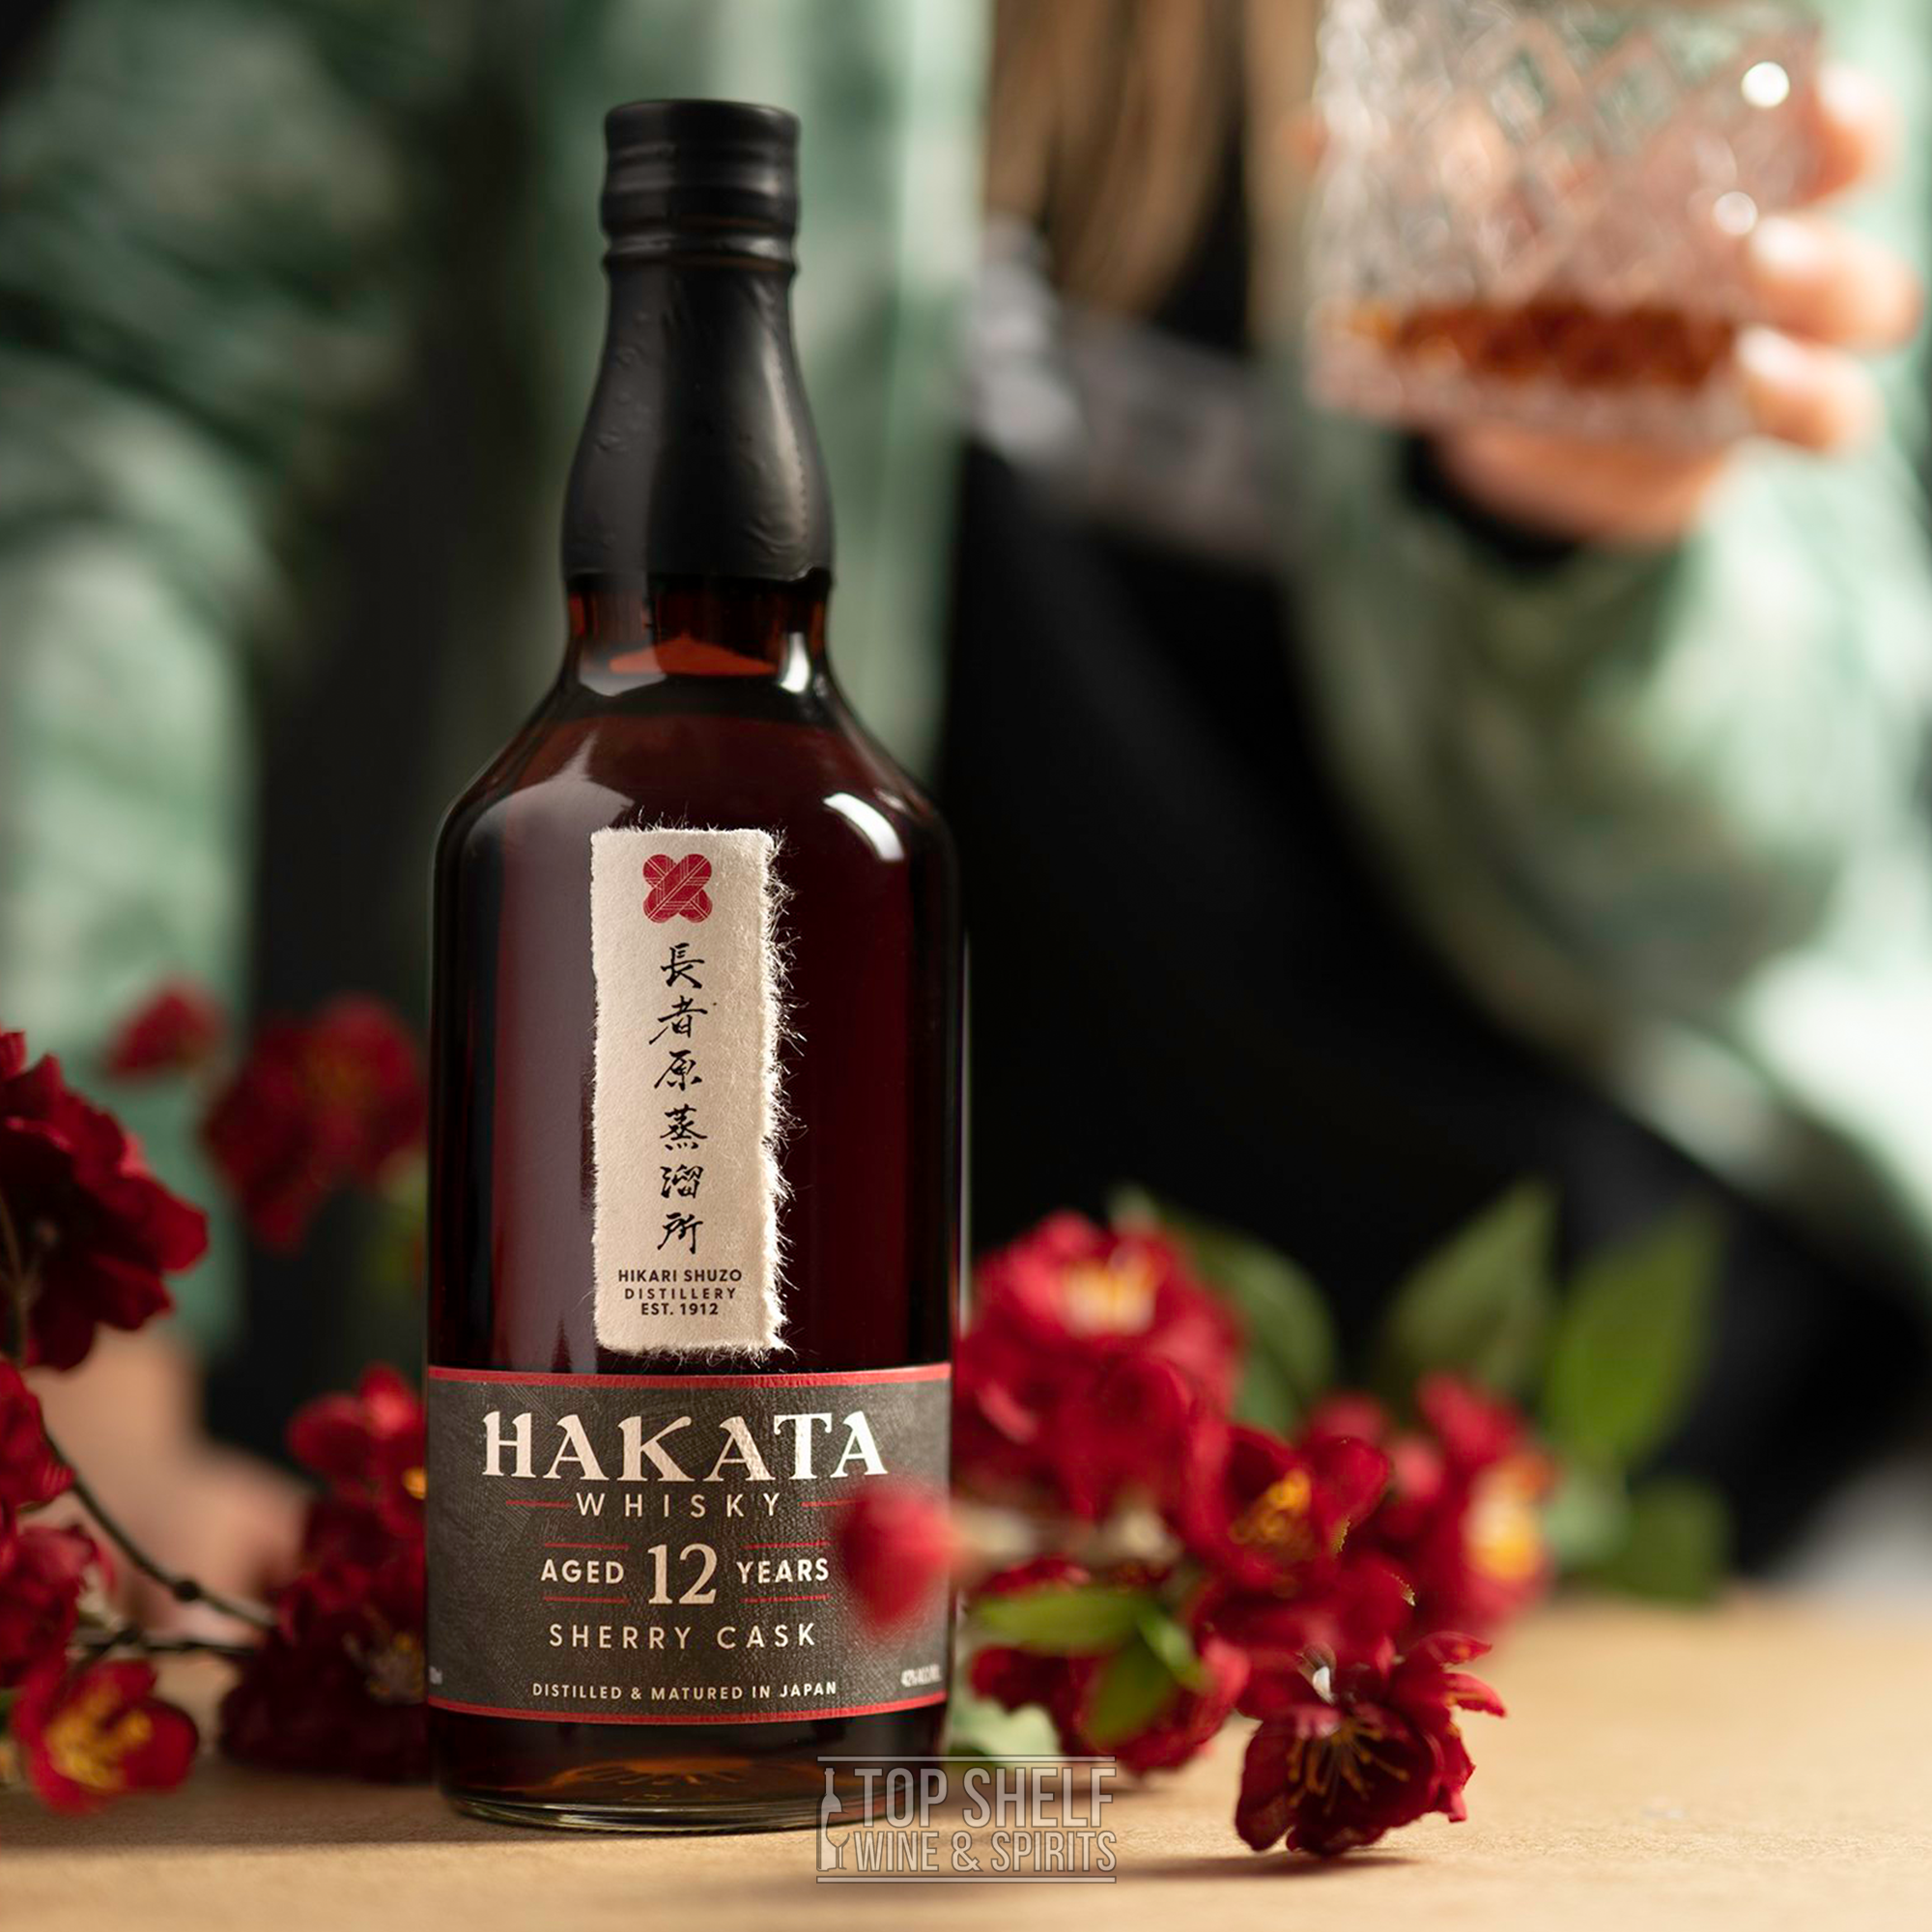 Hakata 12 Year Old Sherry Cask Whisky